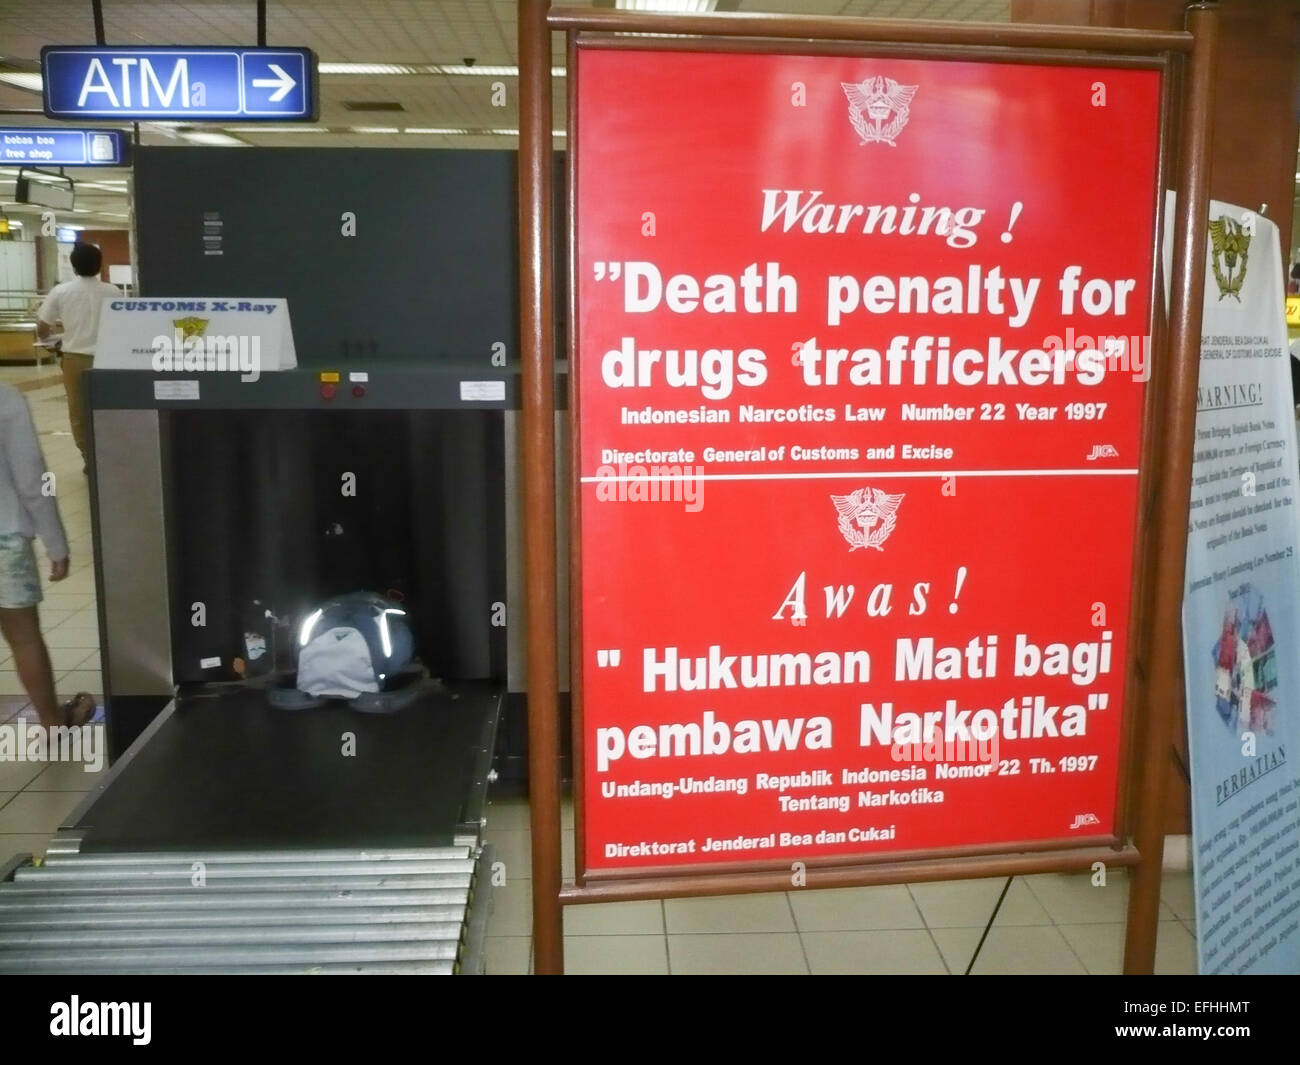 warning of death penalty for drugs traffickers at airport in bali indonesia Stock Photo